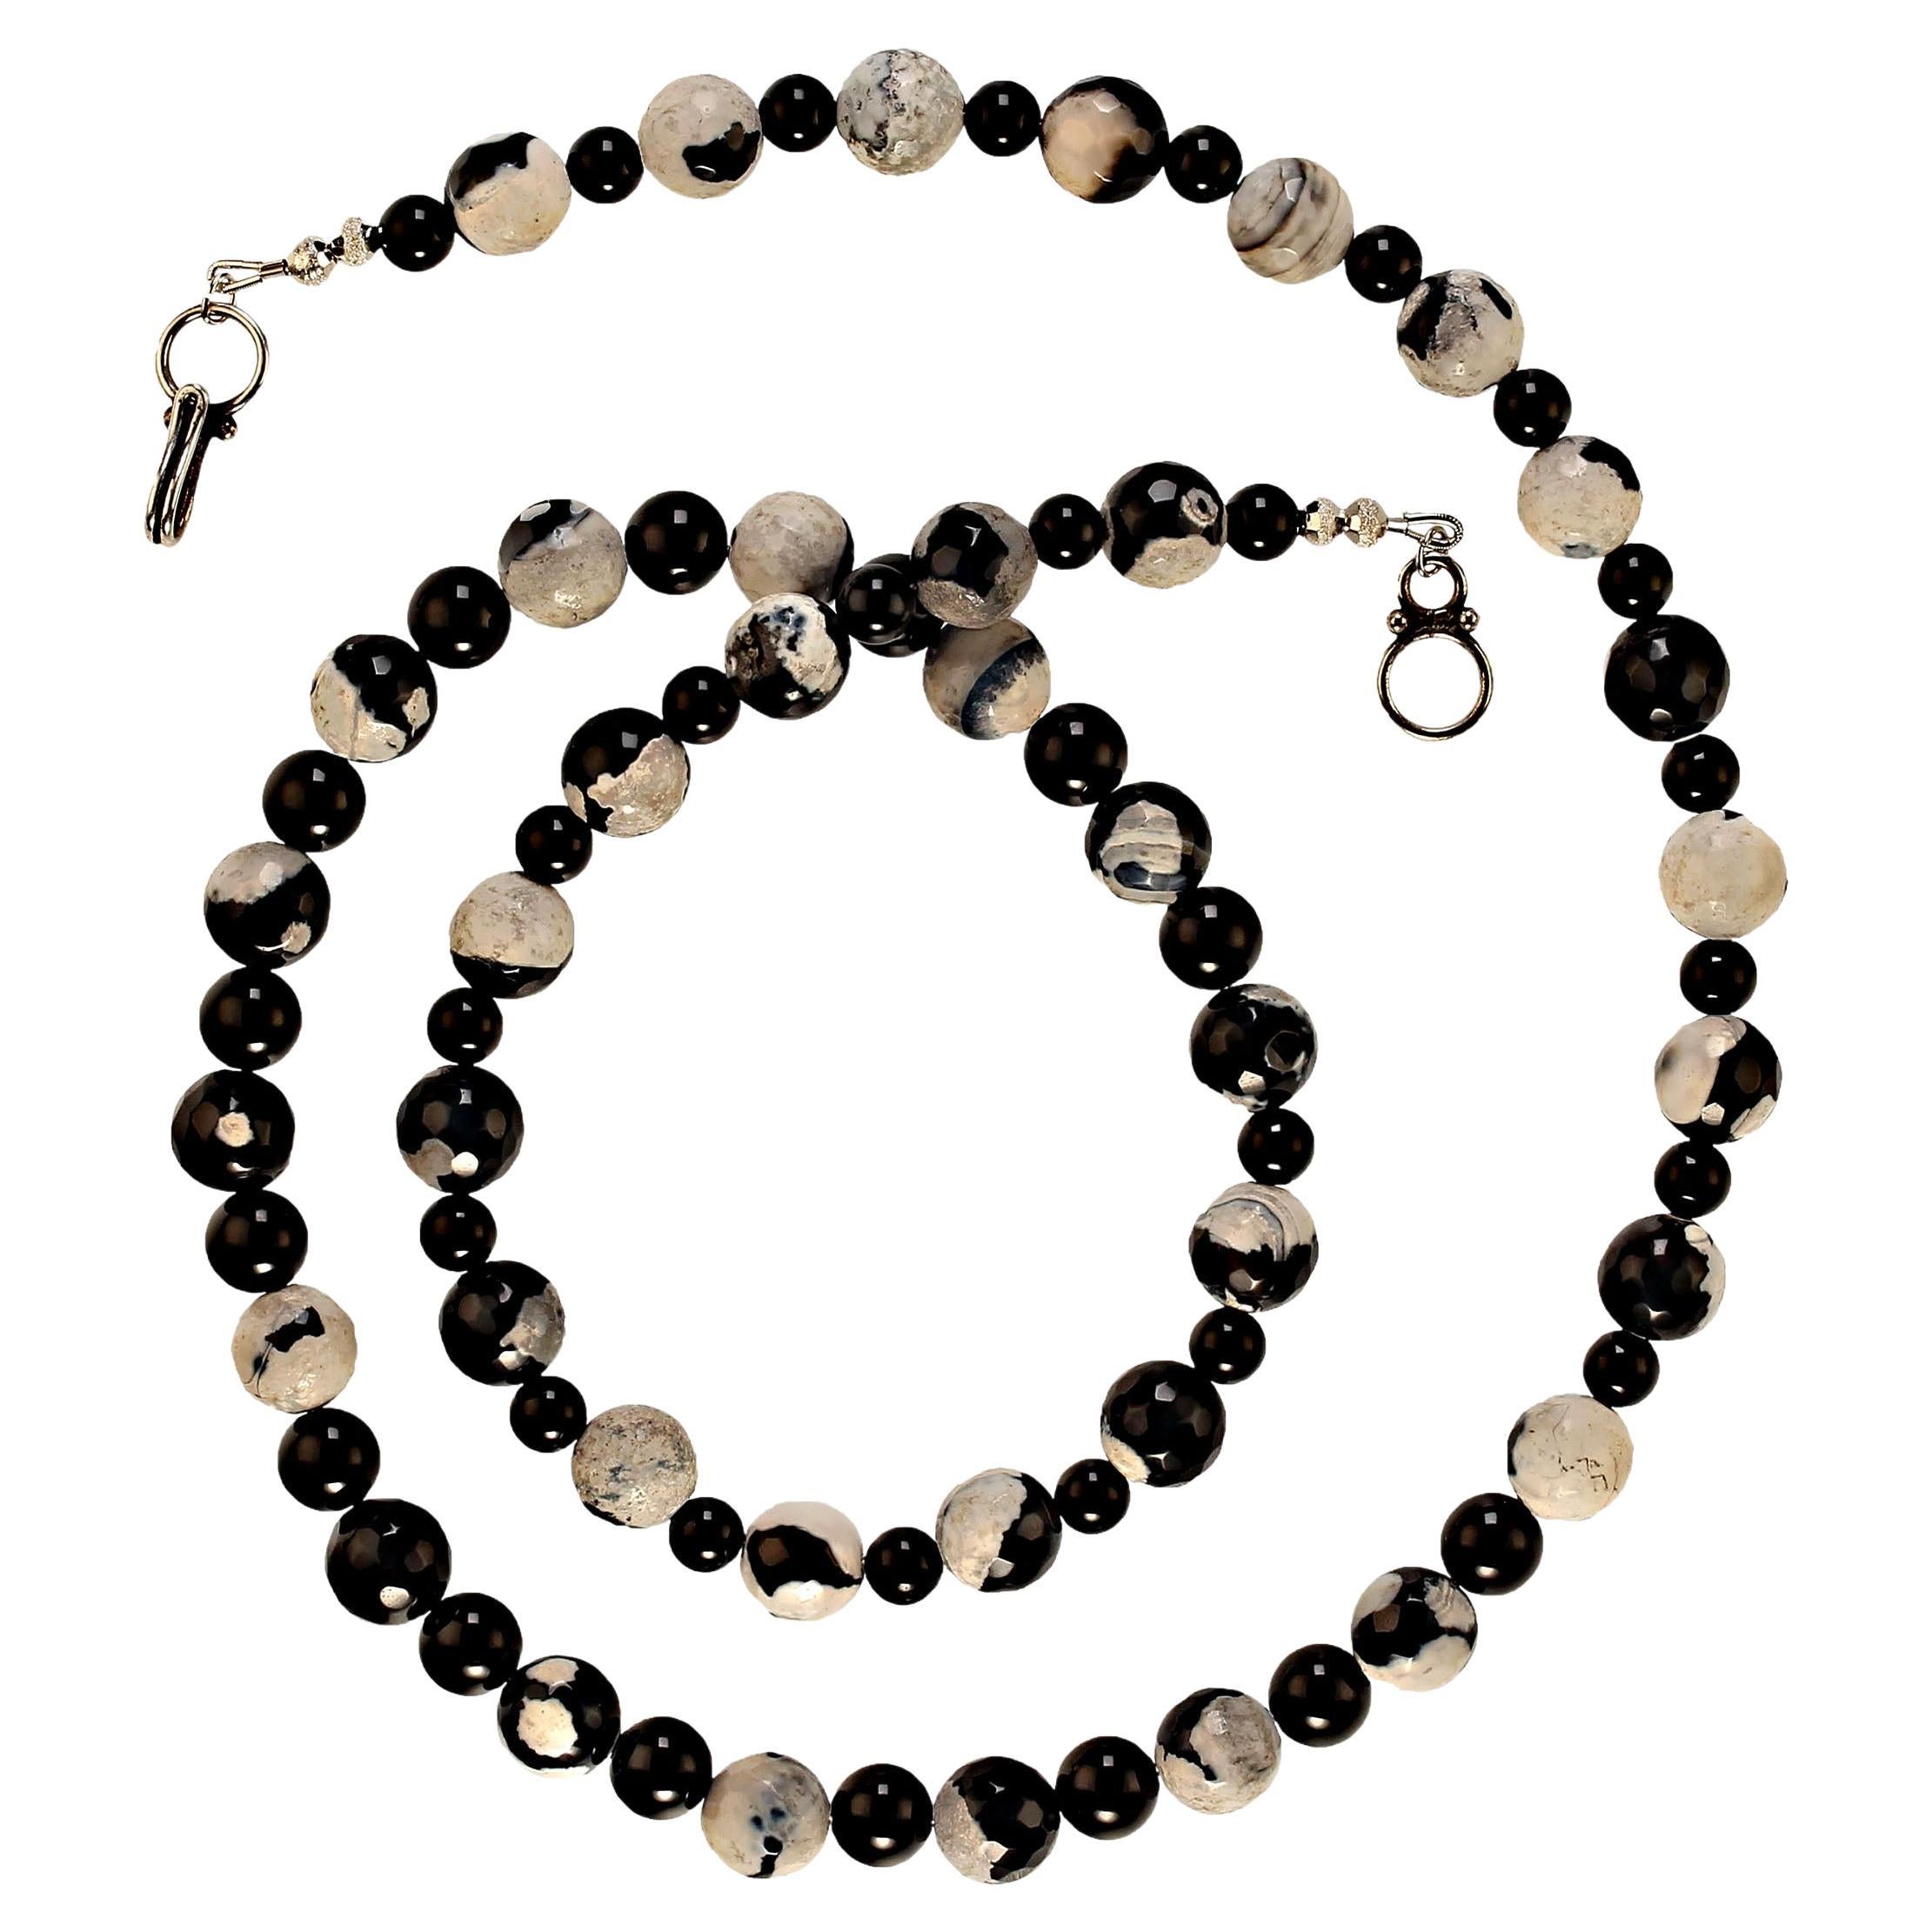 29 Inch modern looking black and white necklace of fire agate and black onyx.  The 10mm fire agates are mottled black and white. They are accented with smooth highly polished black onyx in both 8 and 6 mm. Black and white is a modern and yet always